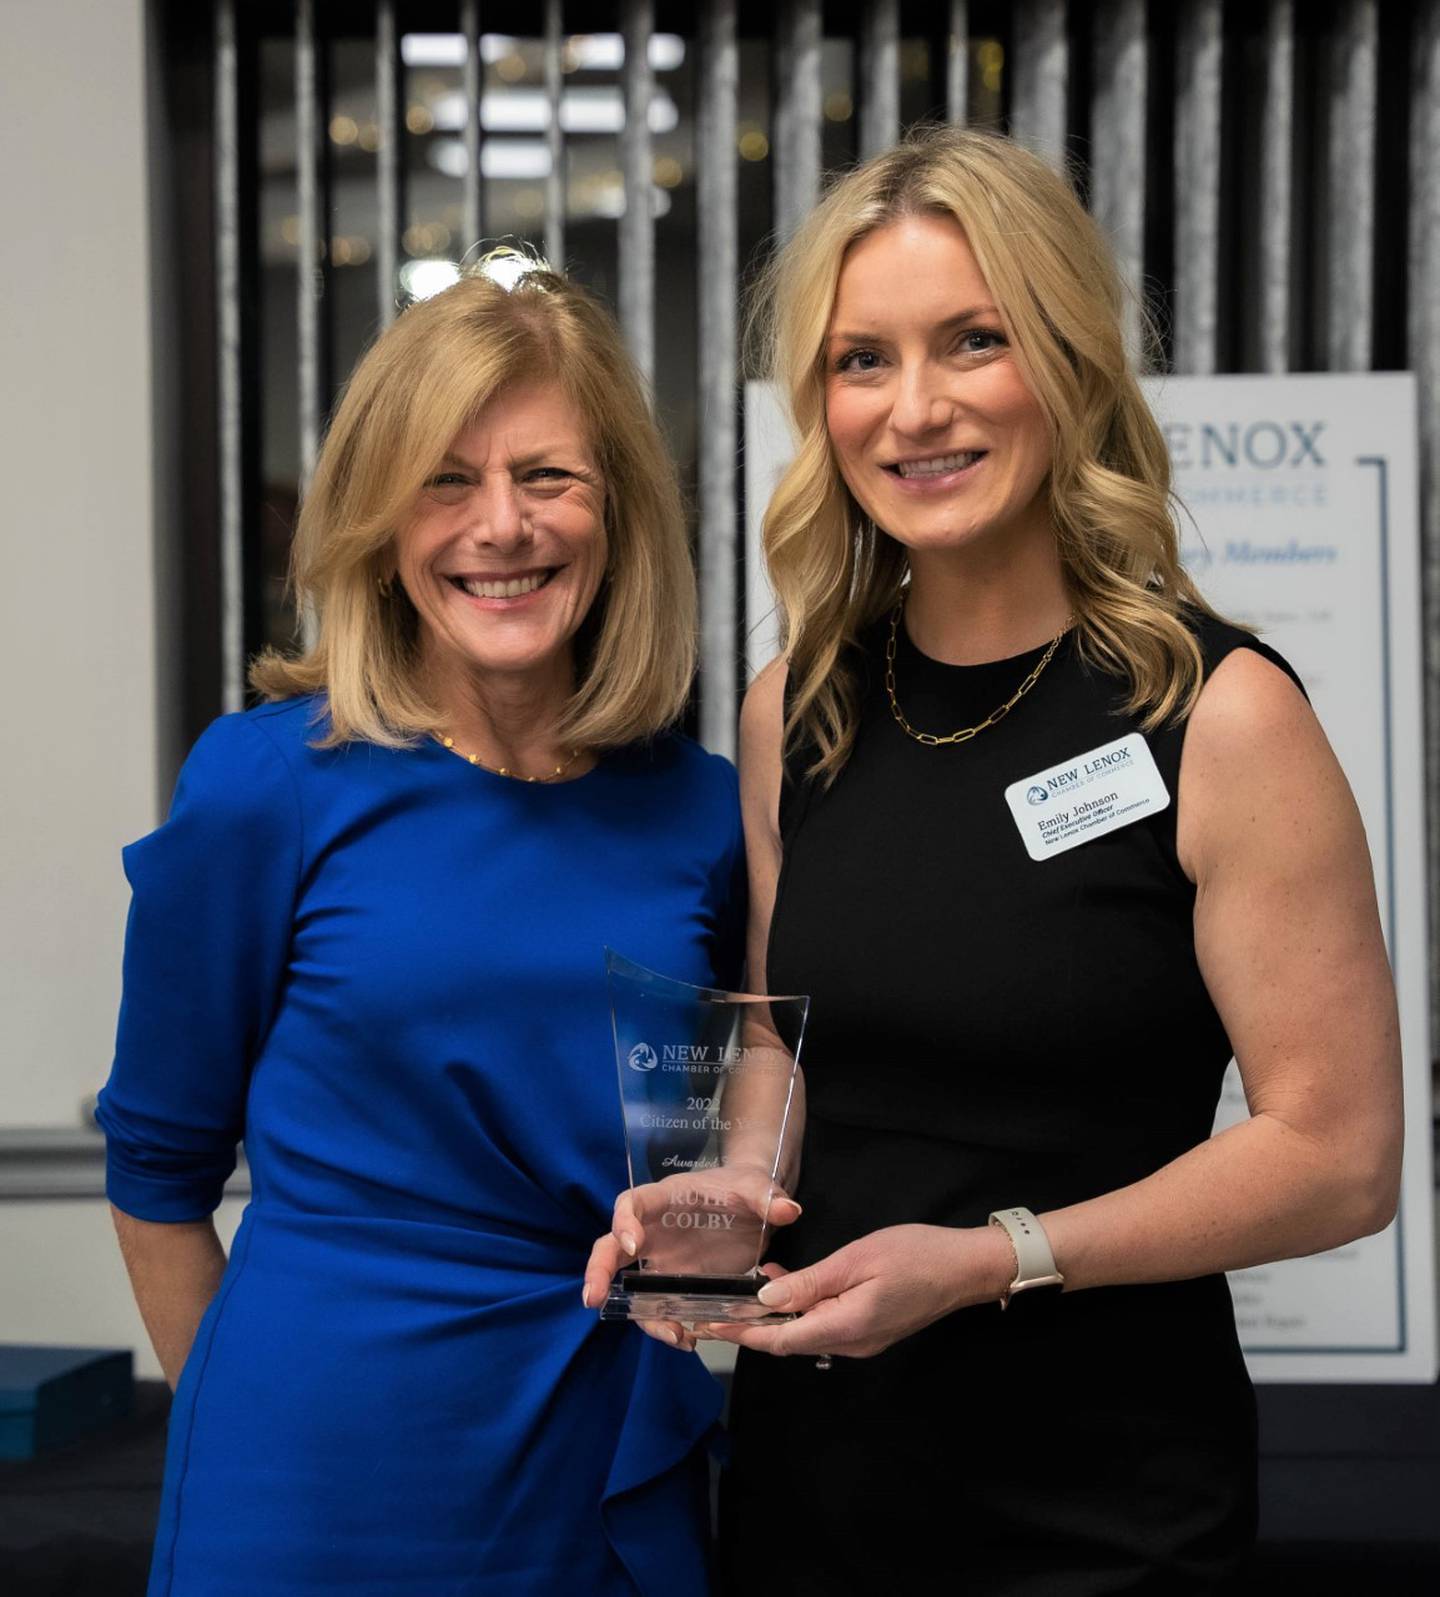 Silver Cross Hospital President and Chief Executive Officer Ruth Colby, left, was named New Lenox Citizen of the Year at the New Lenox Chamber of Commerce’s Annual Dinner Feb. 15. She’s pictured here with New Lenox Chamber CEO Emily Johnson.